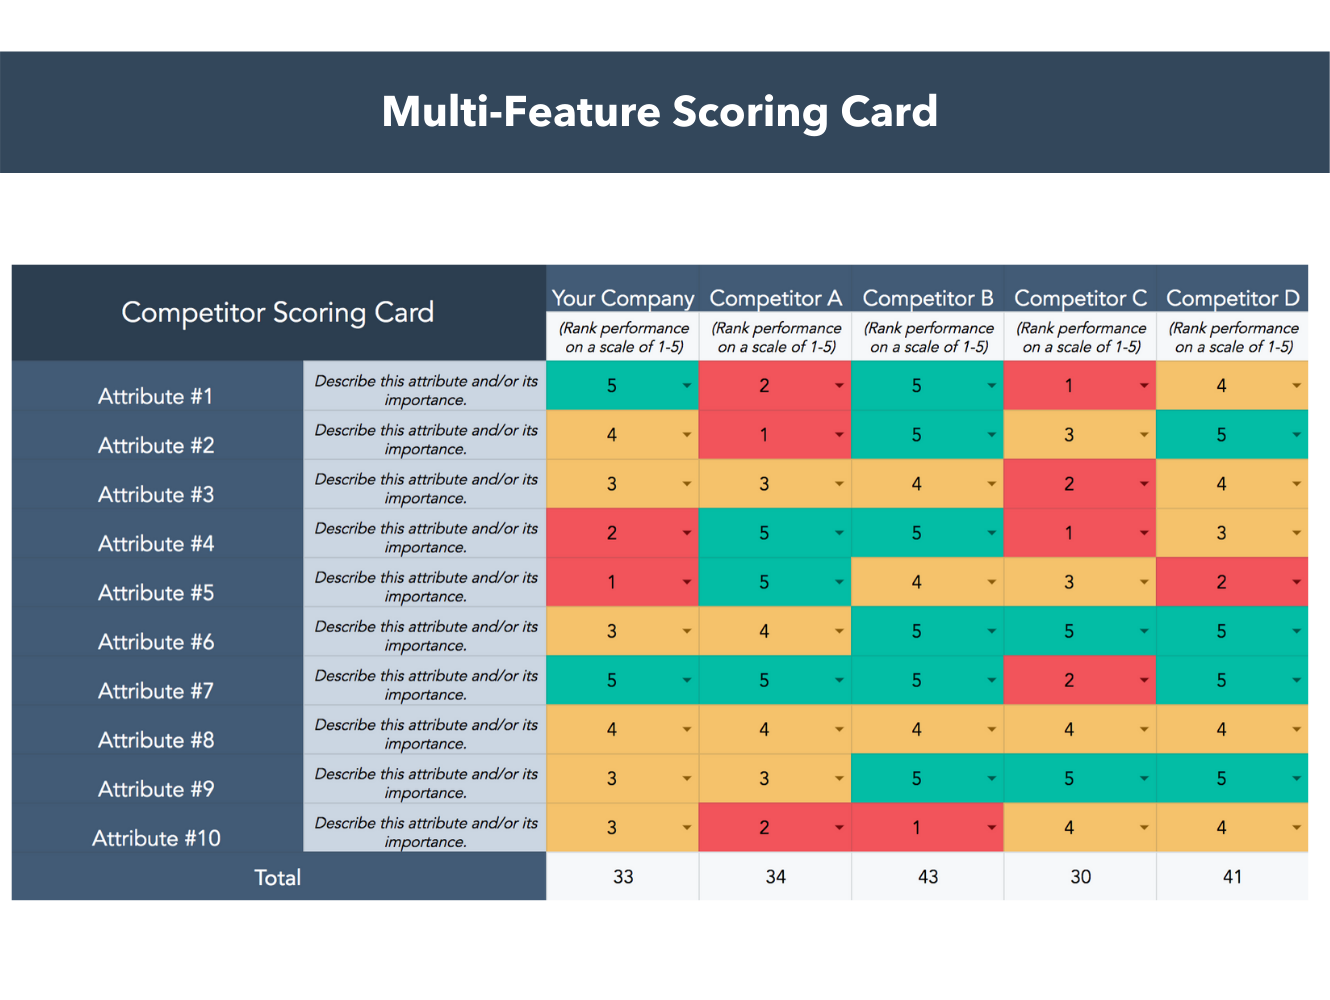 HubSpot's multi-feature scoring card as part of the competitive analysis templates